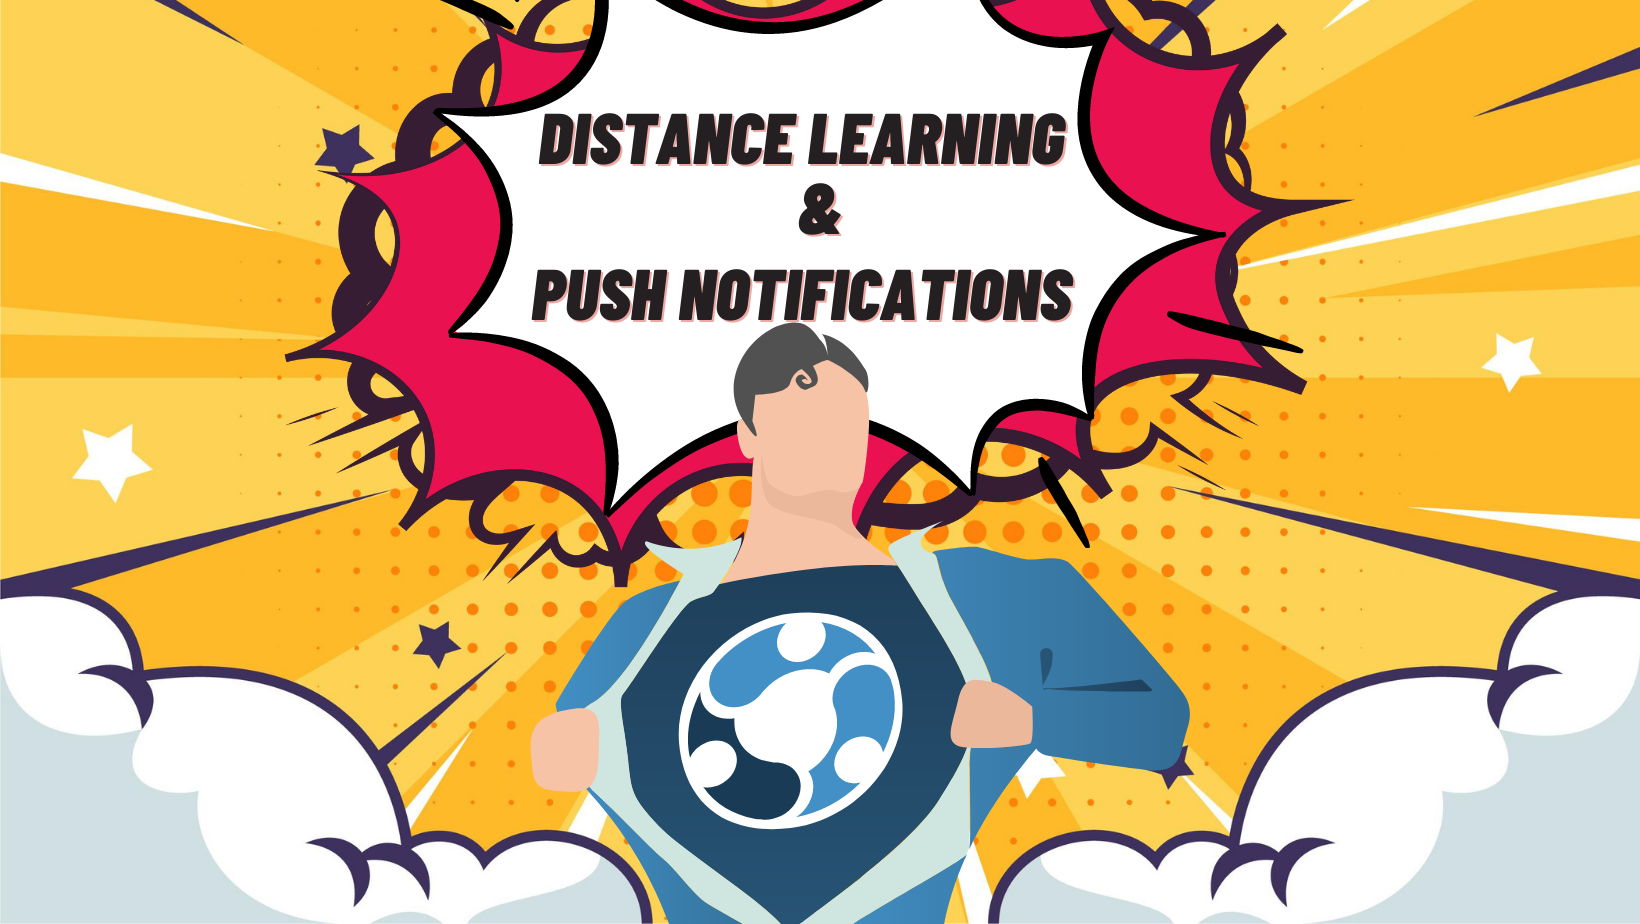 E-learning and push notifications